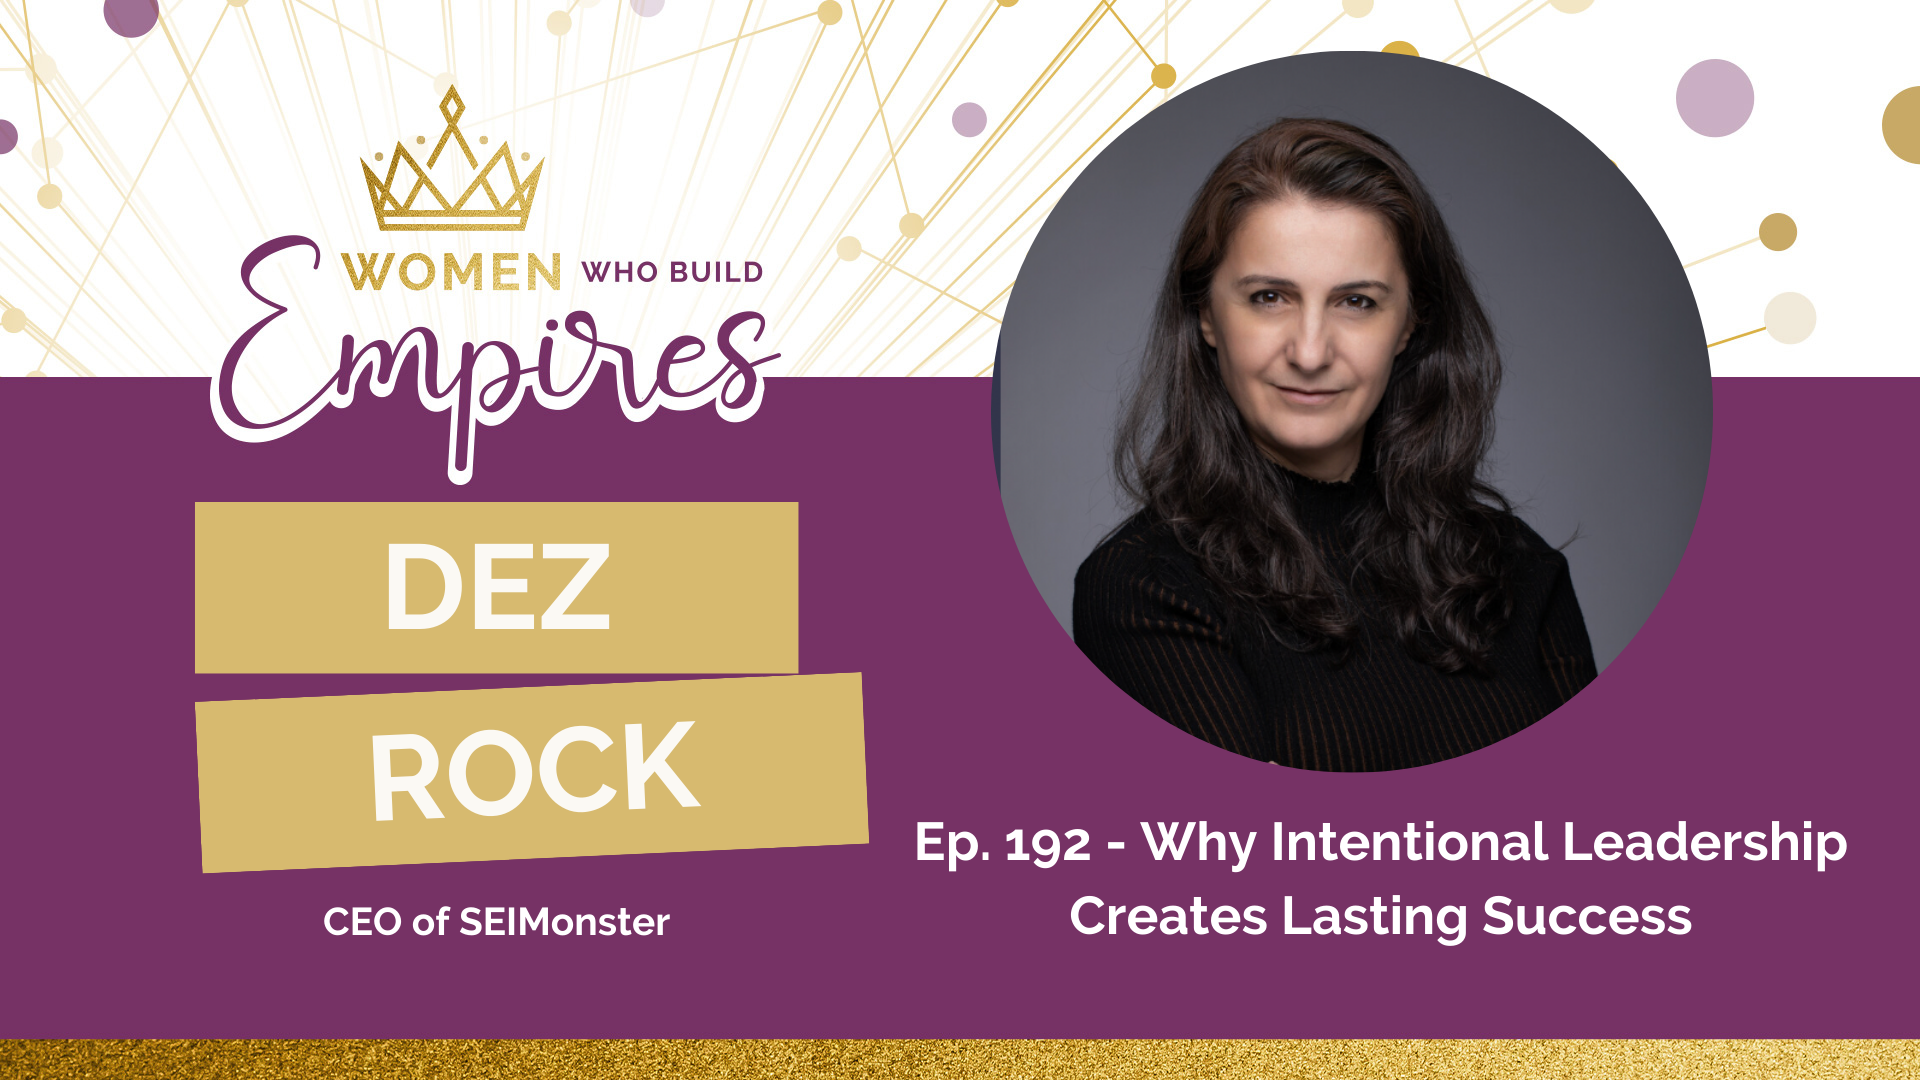 Ep. 192 Dez Rock: Why Intentional Leadership Creates Lasting Success